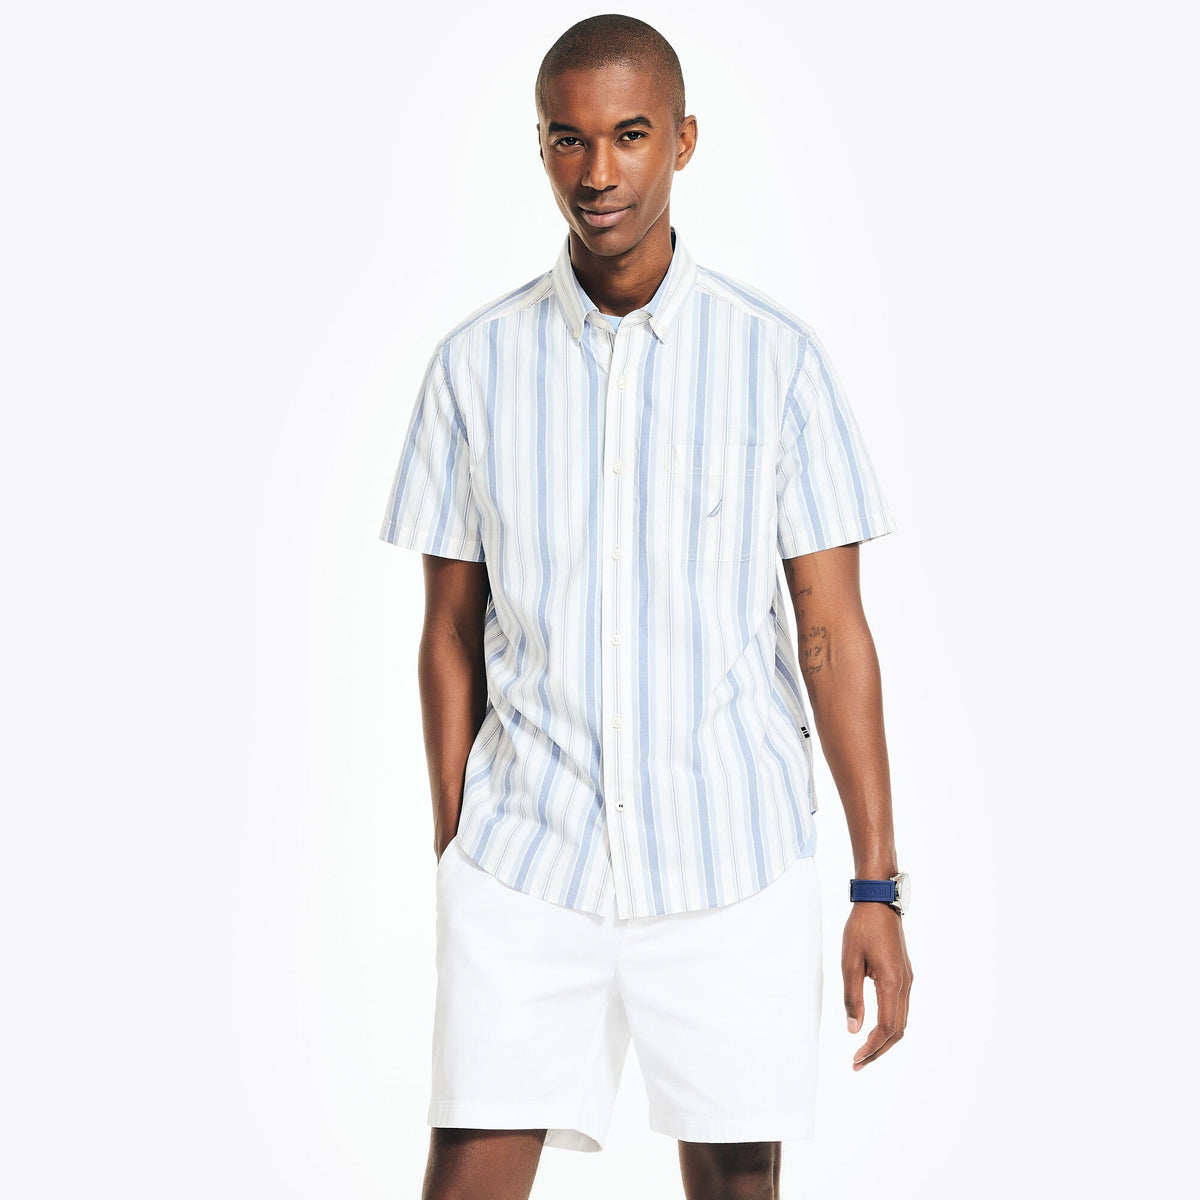 Nautica Men's Sustainably Crafted Striped Short-Sleeve Shirt Sail White